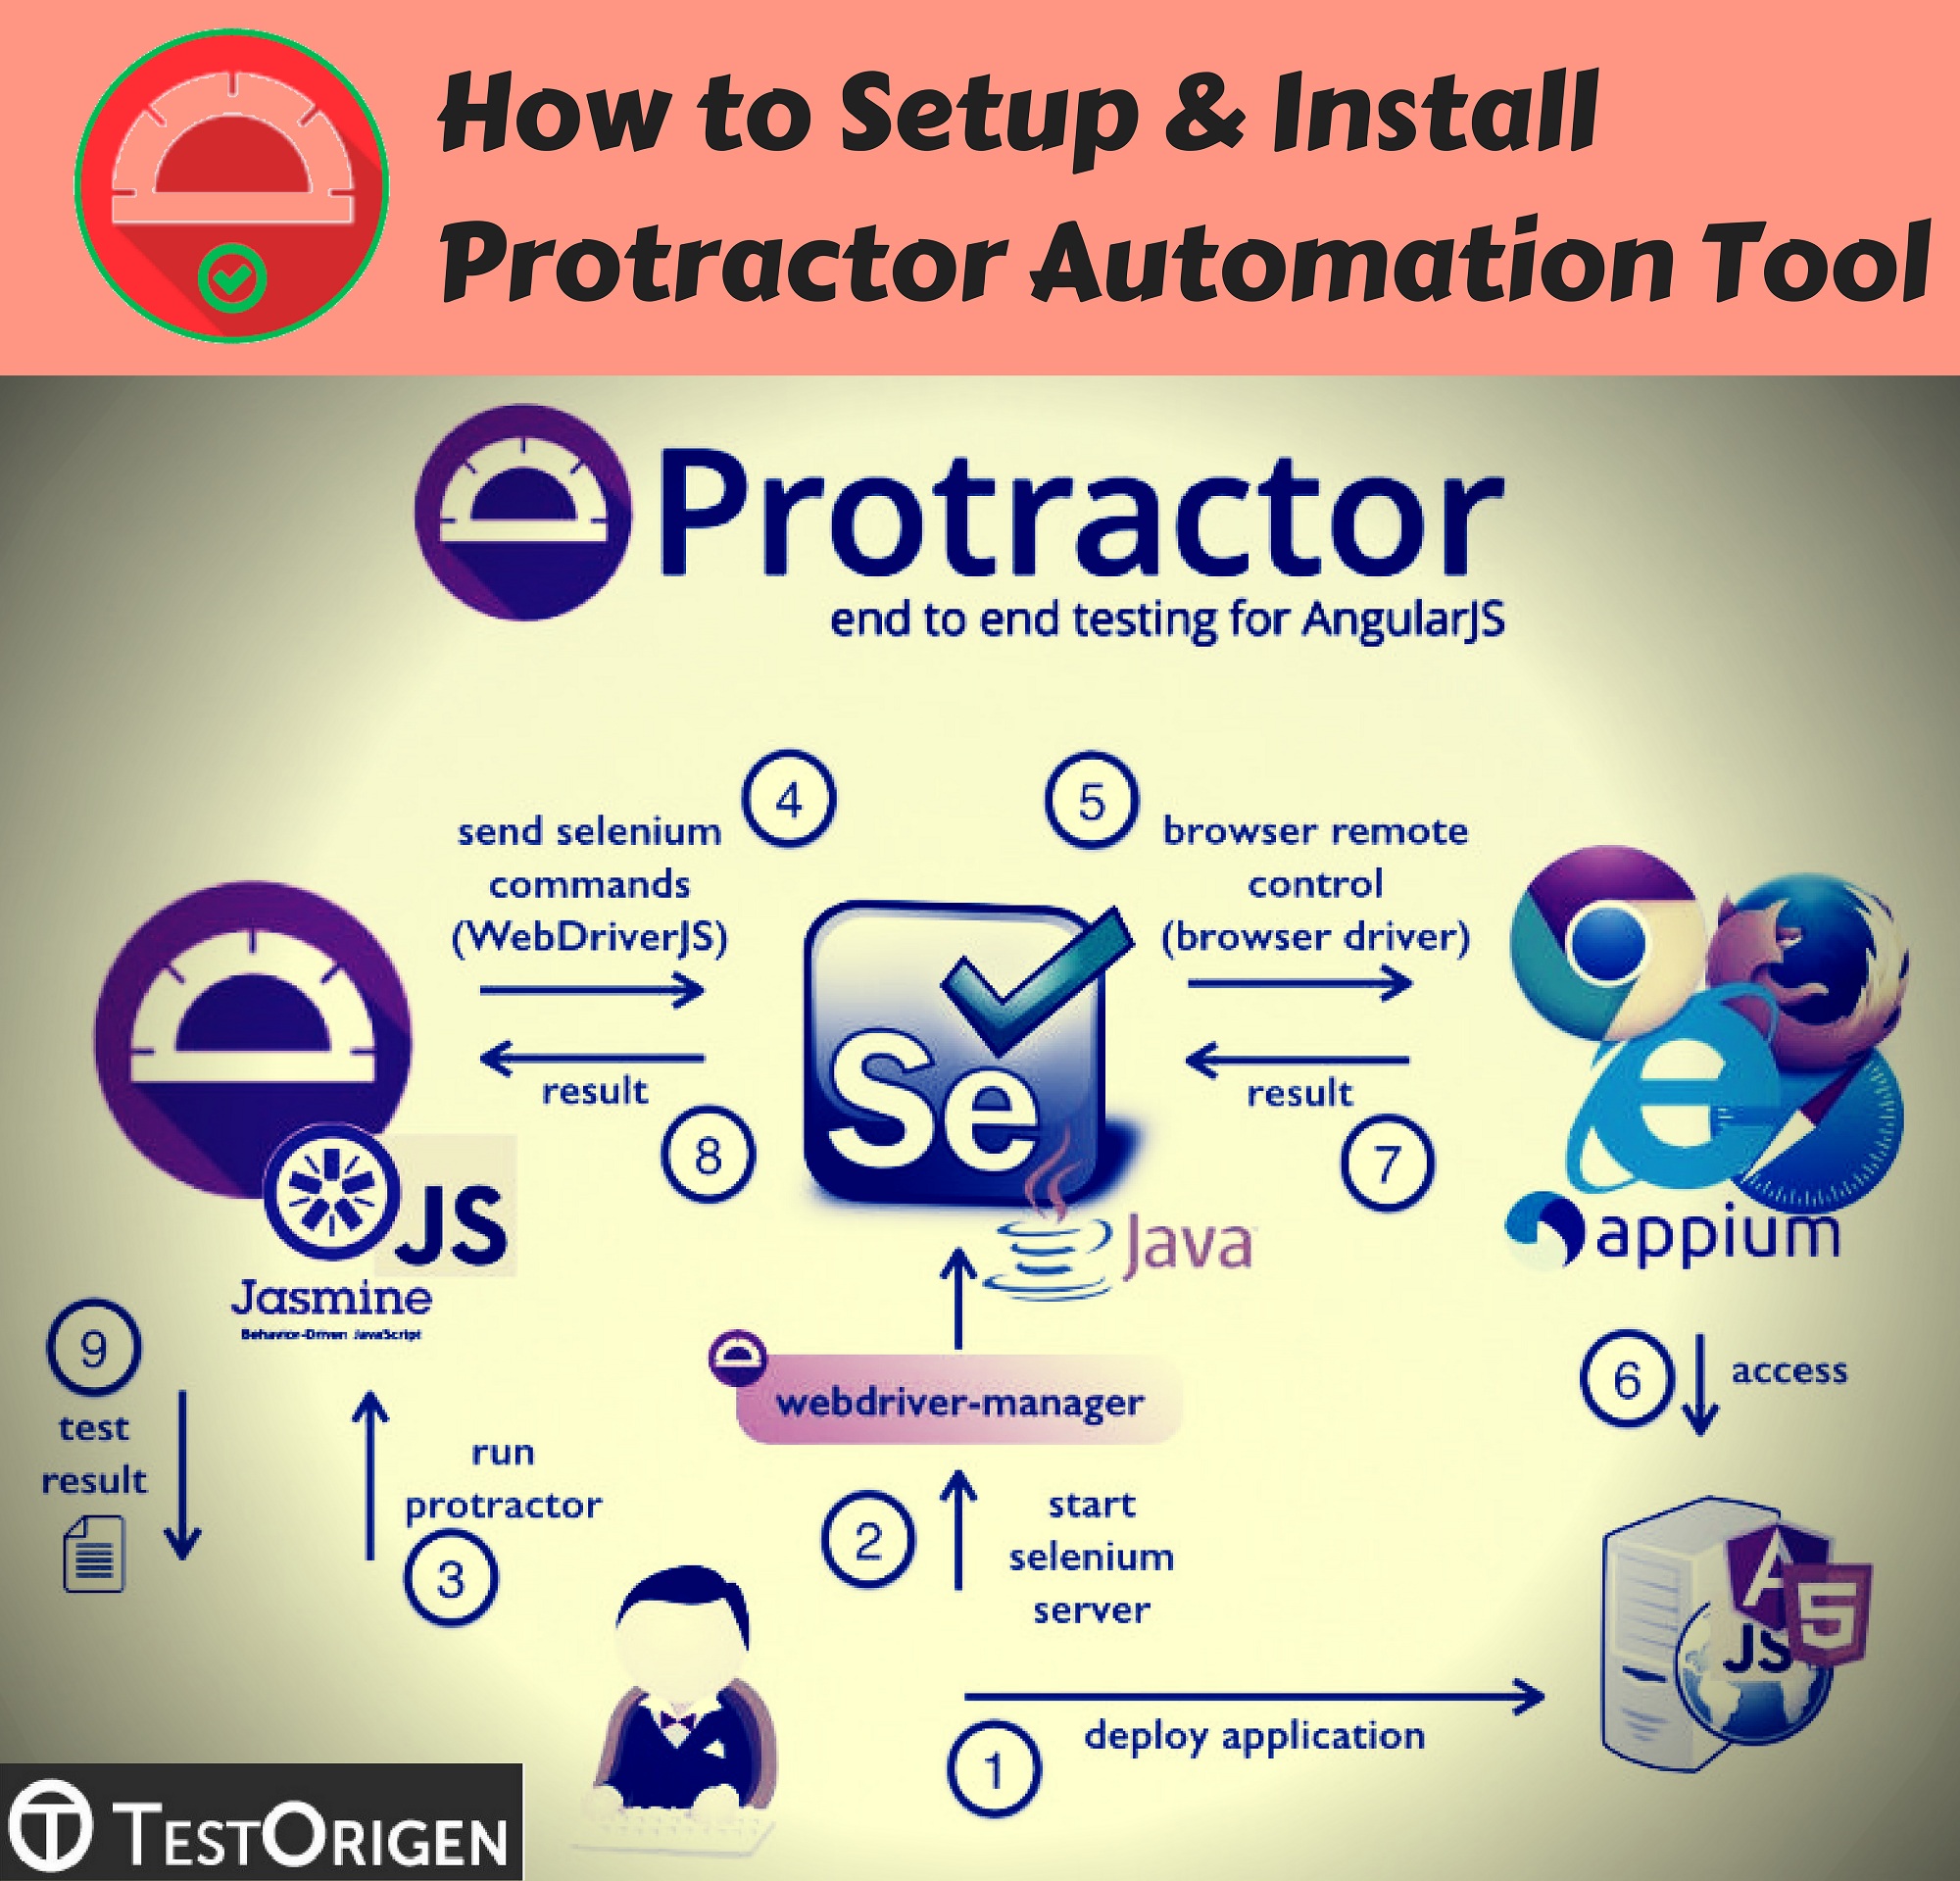 How to Setup & Install Protractor Automation Tool